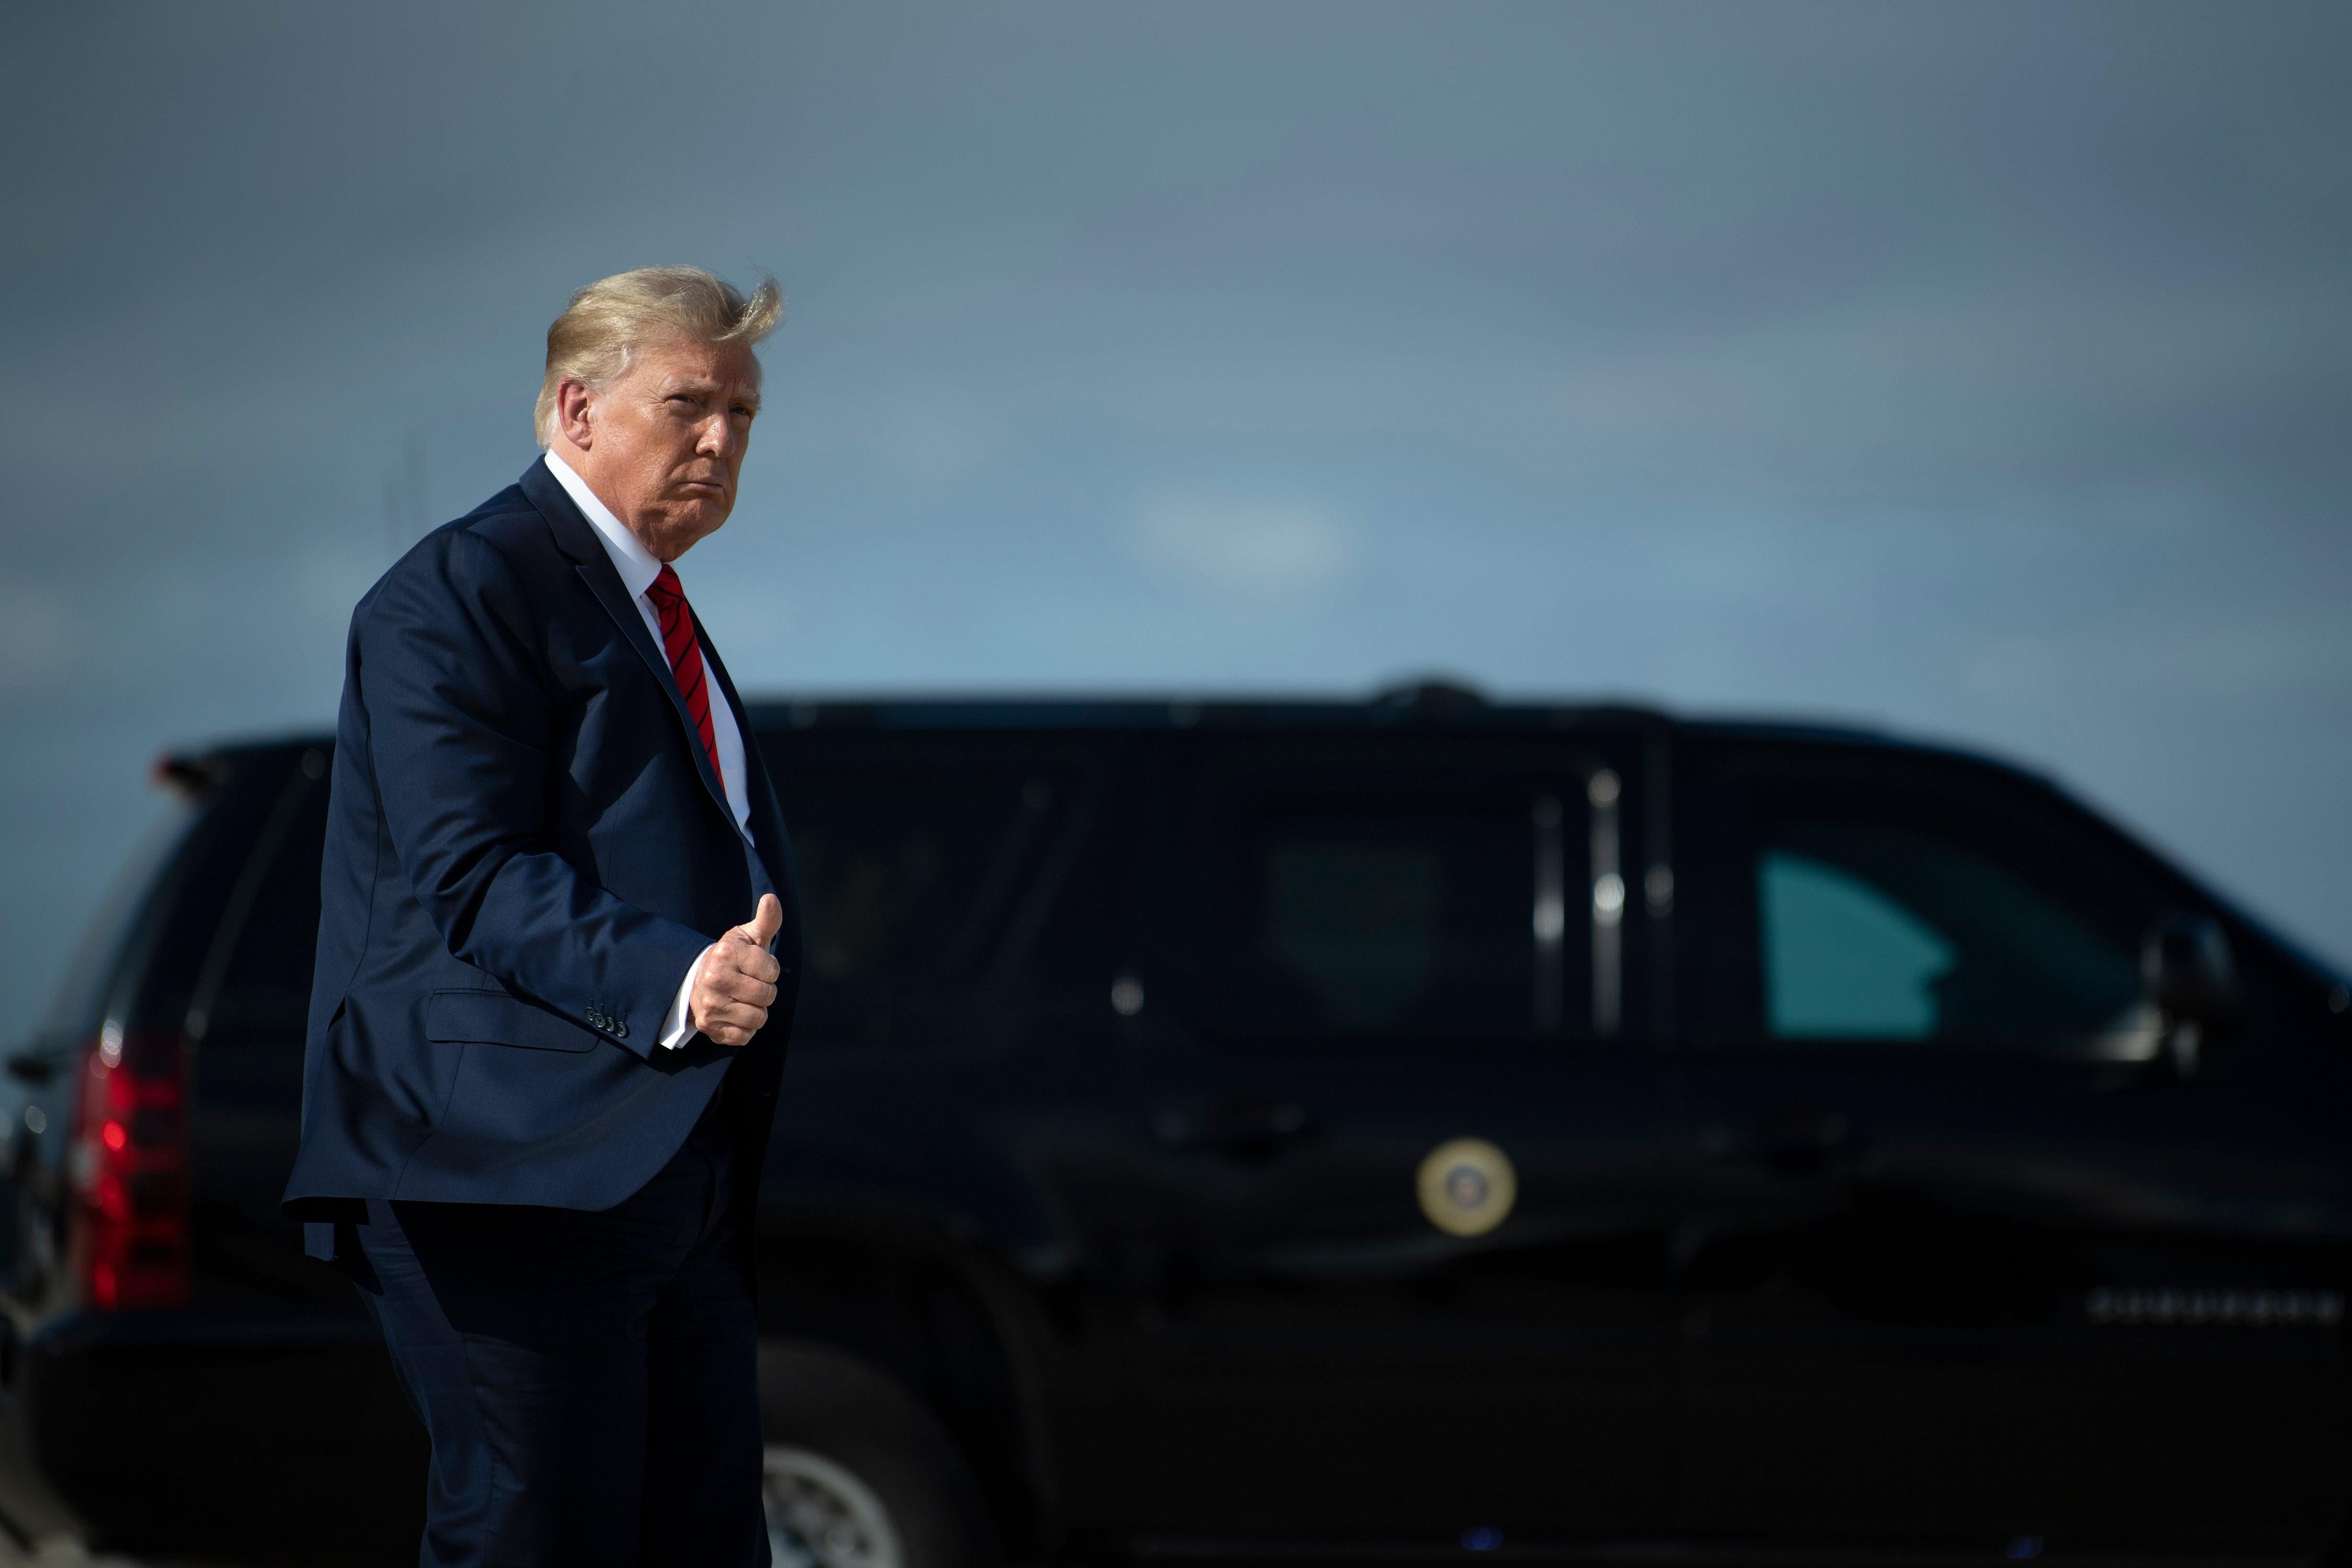 President Donald Trump arrives to board Air Force One at Joint Base Andrews in Maryland on September 12, 2020.